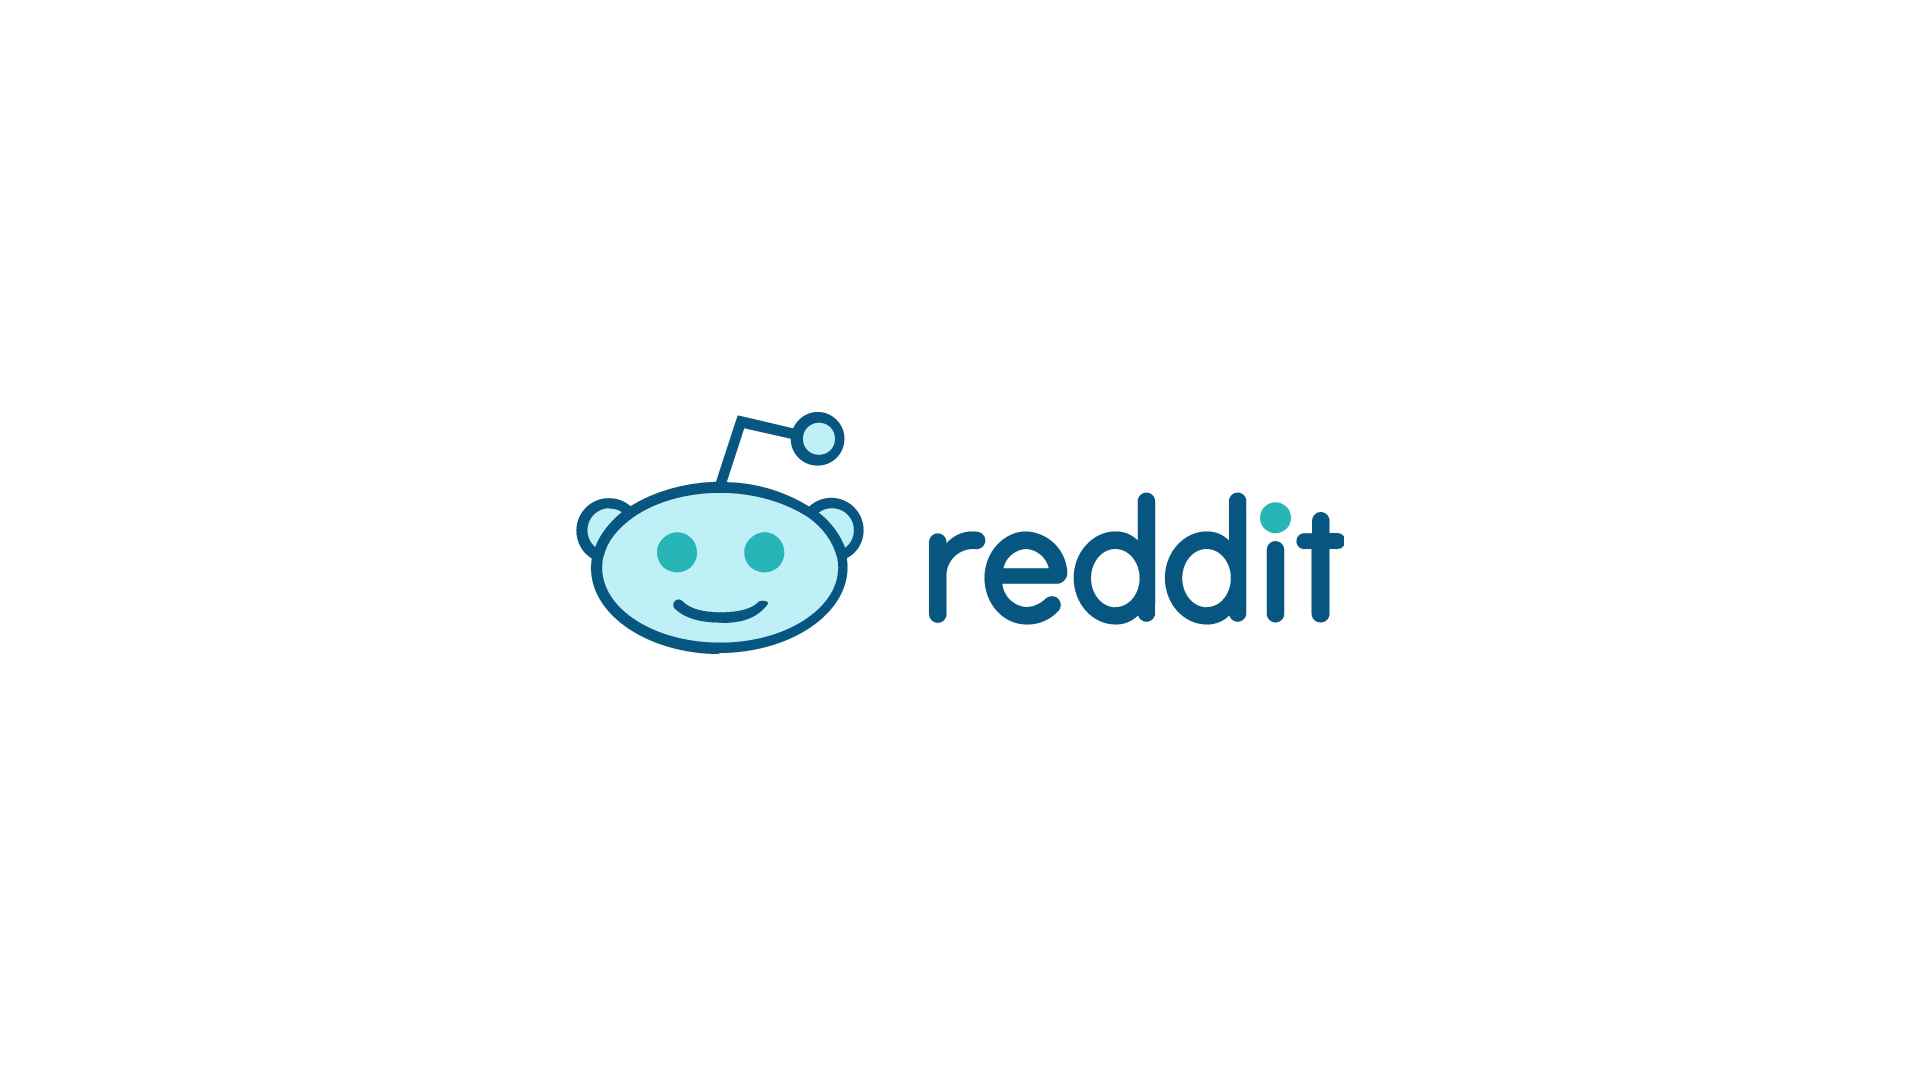 How can one block or mute unwanted users or content on Reddit?